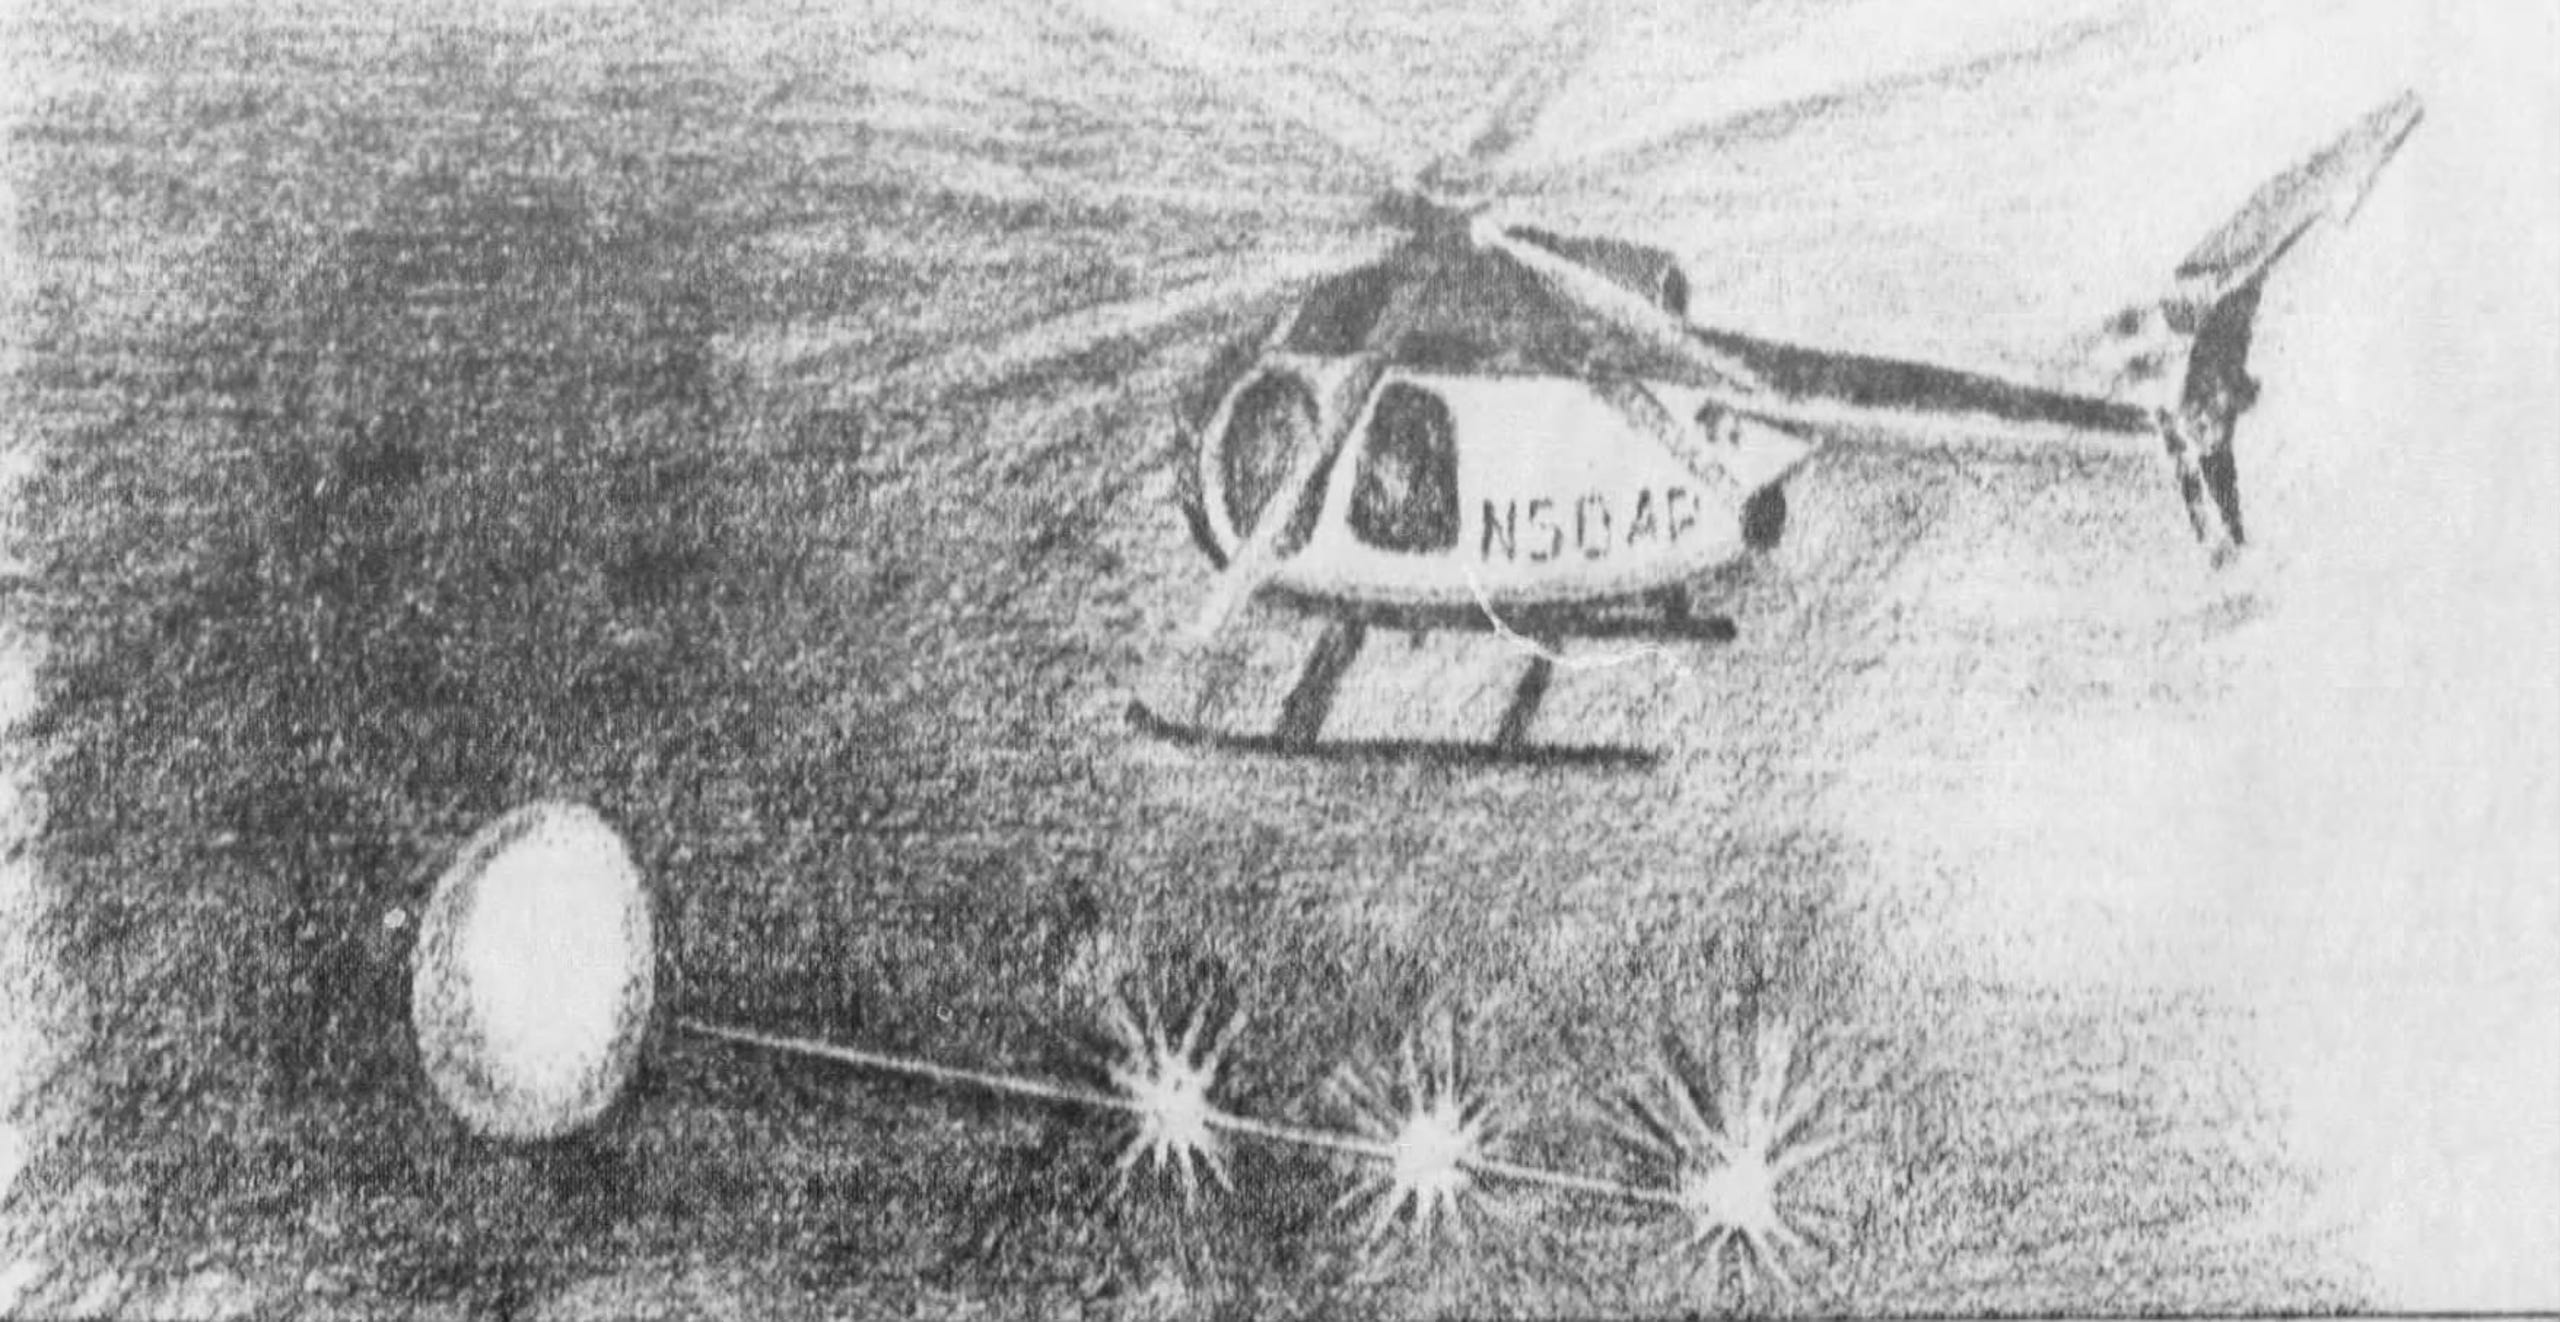 This Courier Journal illustration depicts what two police officers said they saw while doing a routine helicopter patrol on Feb. 27, 1993.